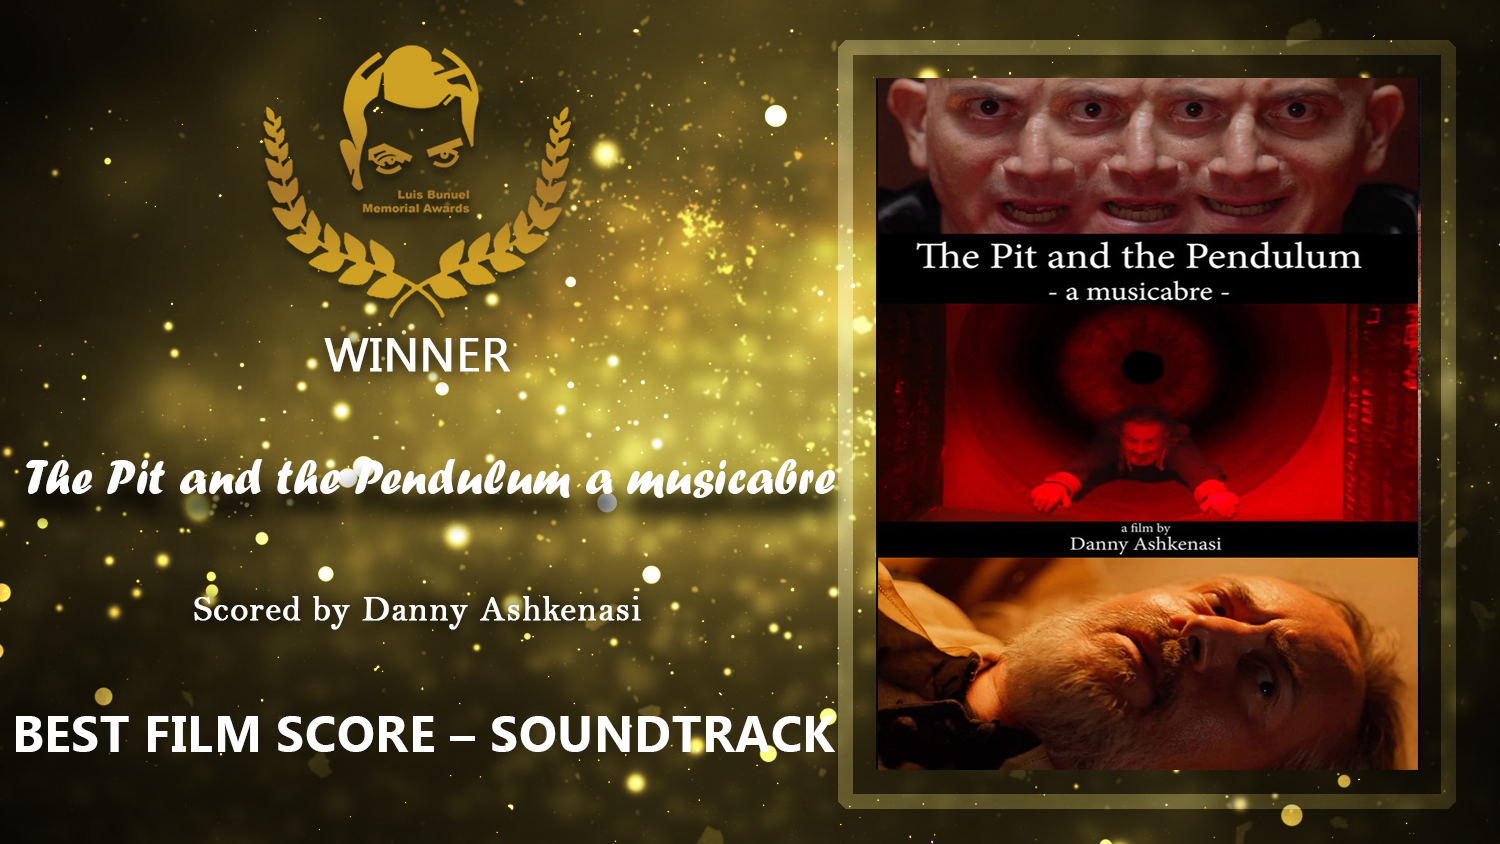 The Pit and the Pendulum a musicabre Best Film Score – Soundtrack